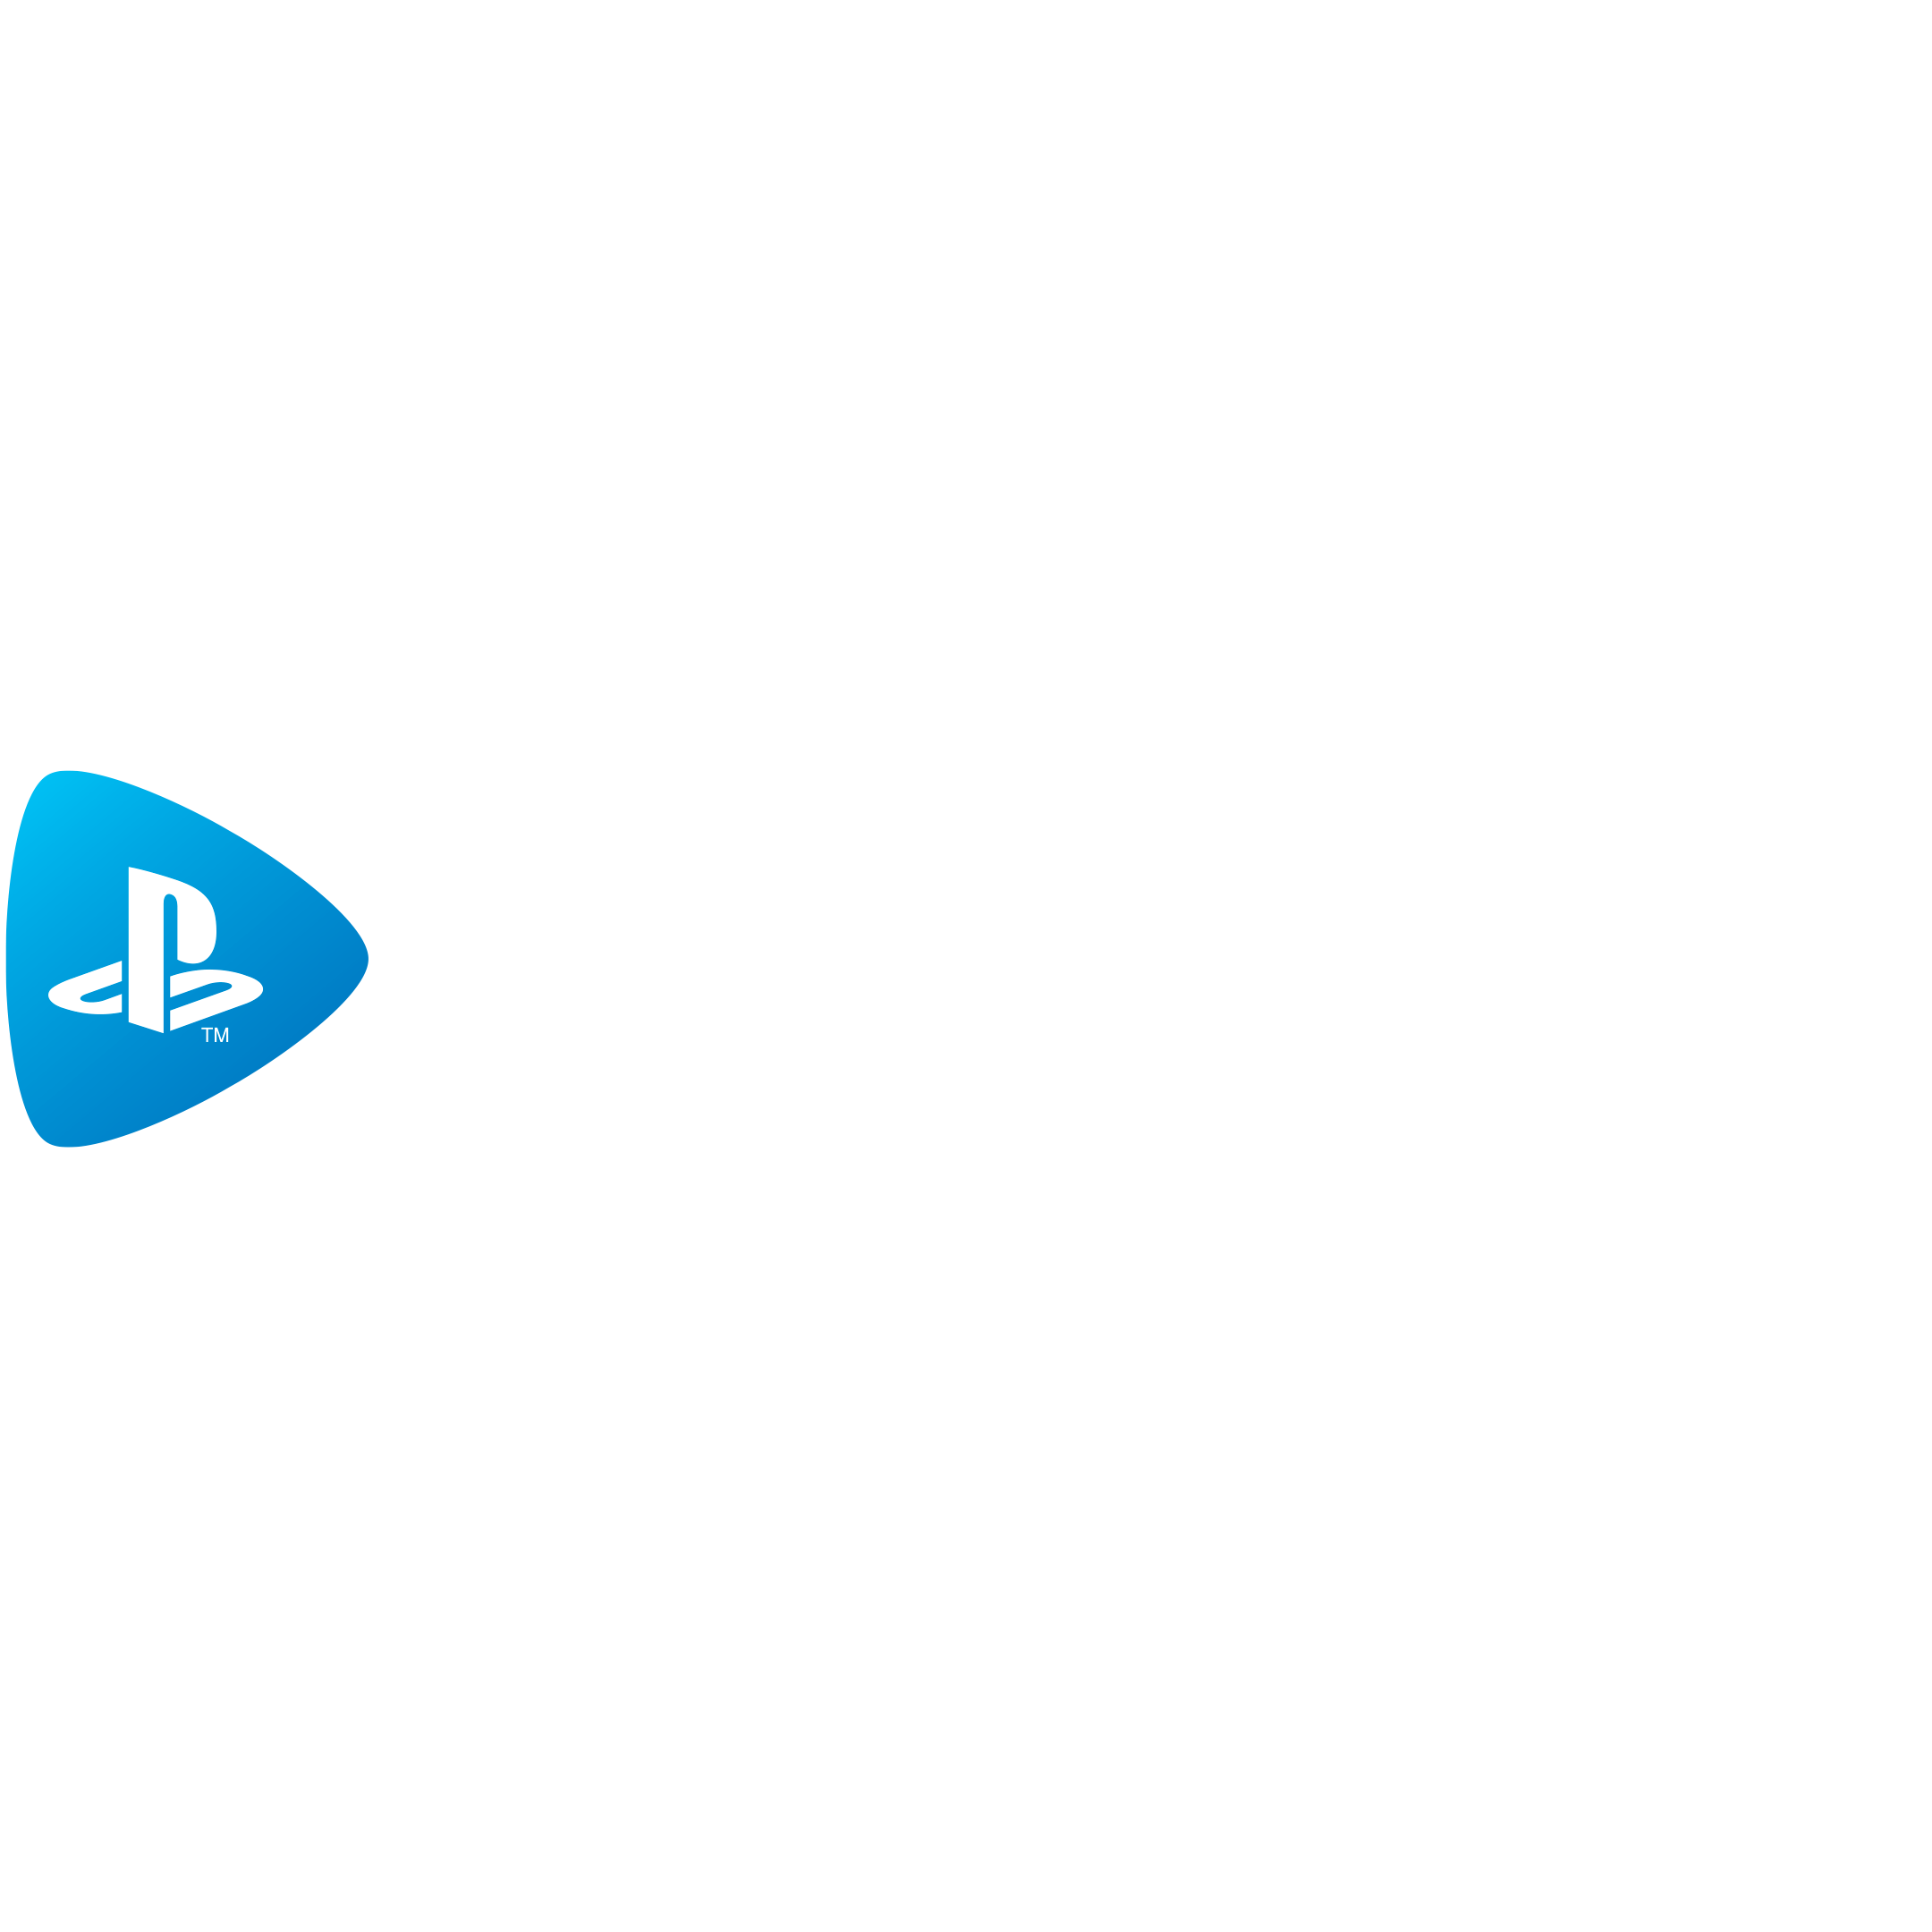 canada ps4 store